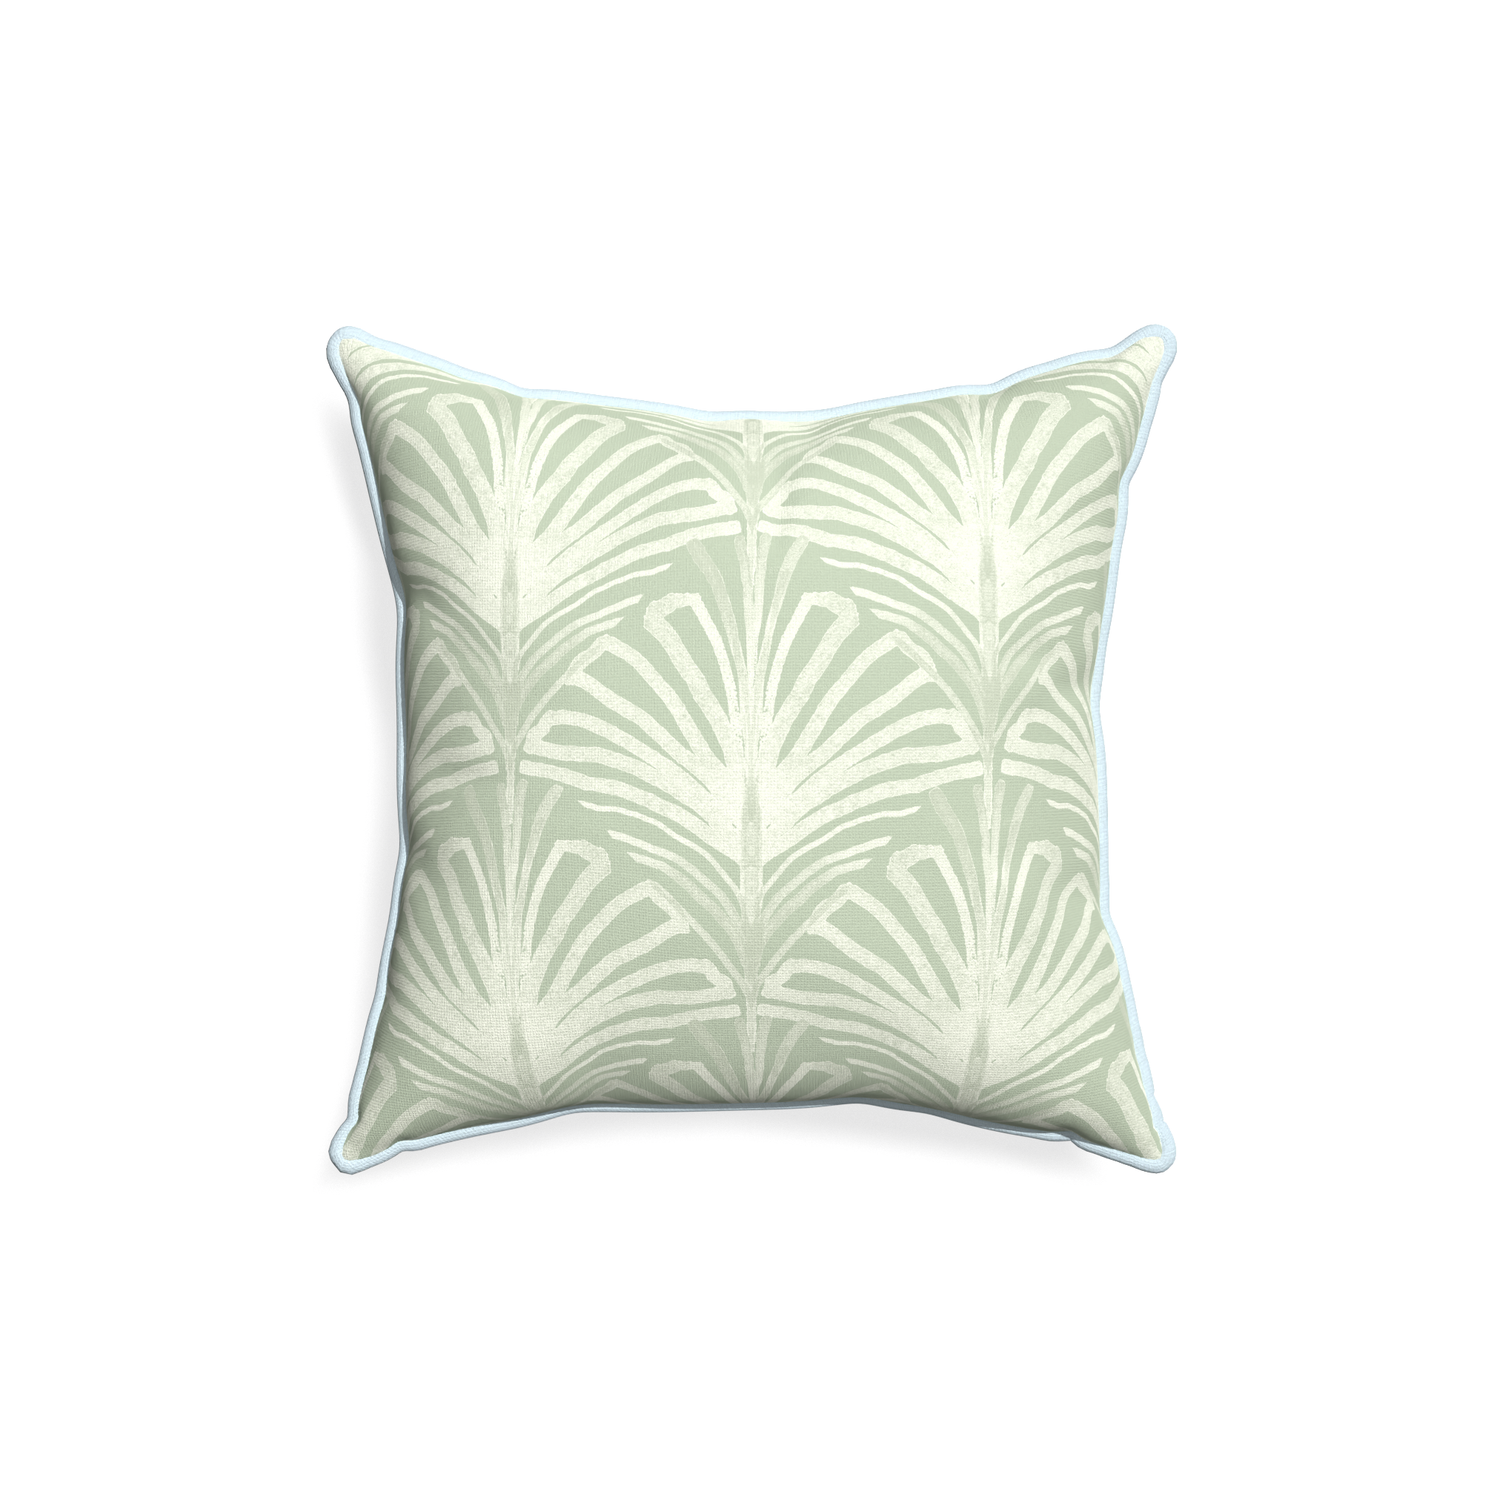 18-square suzy sage custom pillow with powder piping on white background